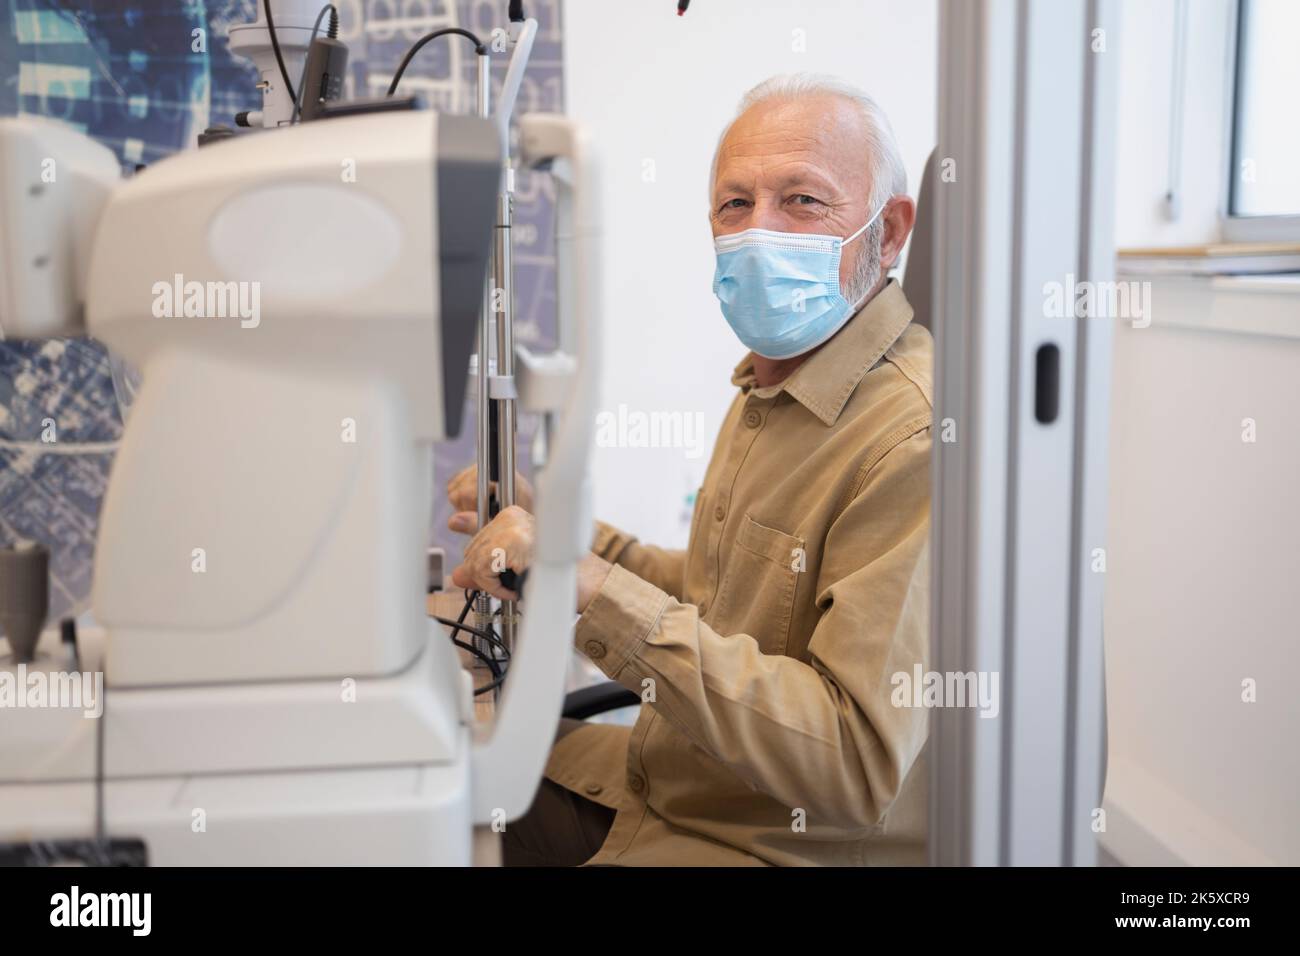 Older man wearing mask holding clinical equipment Stock Photo